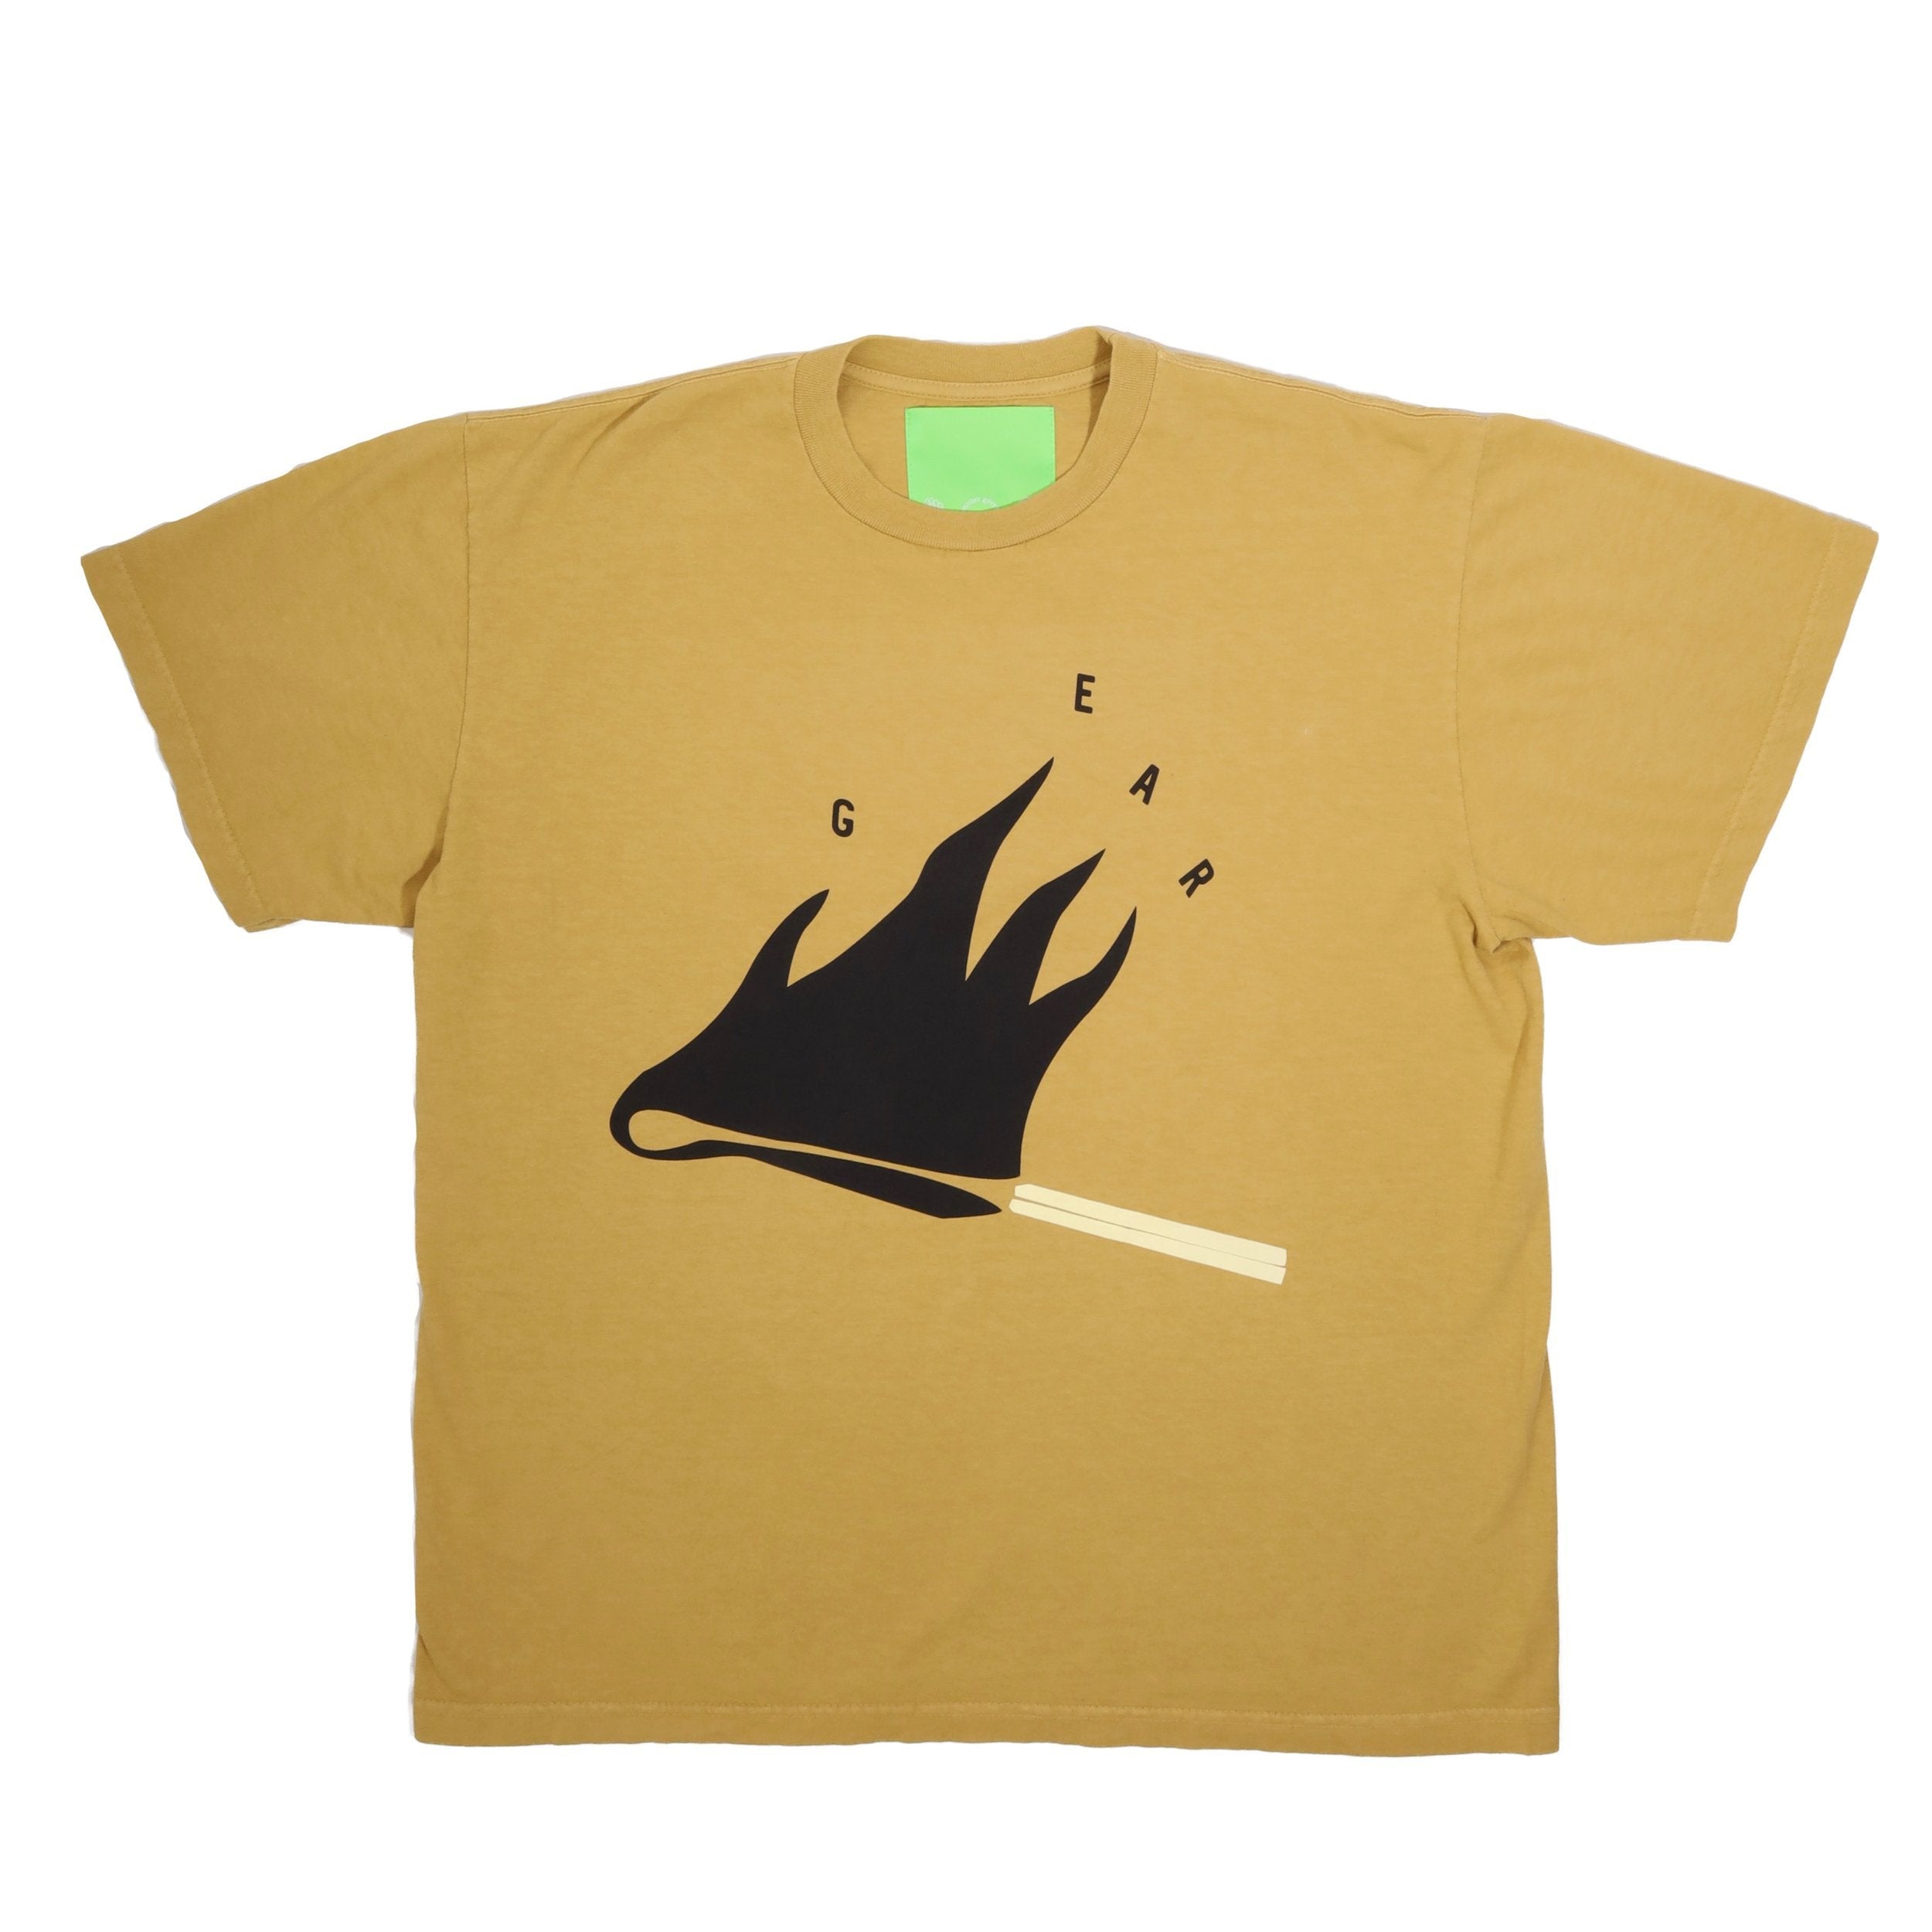 Safety Matches Tee - Wax-Mister Green-Mister Green